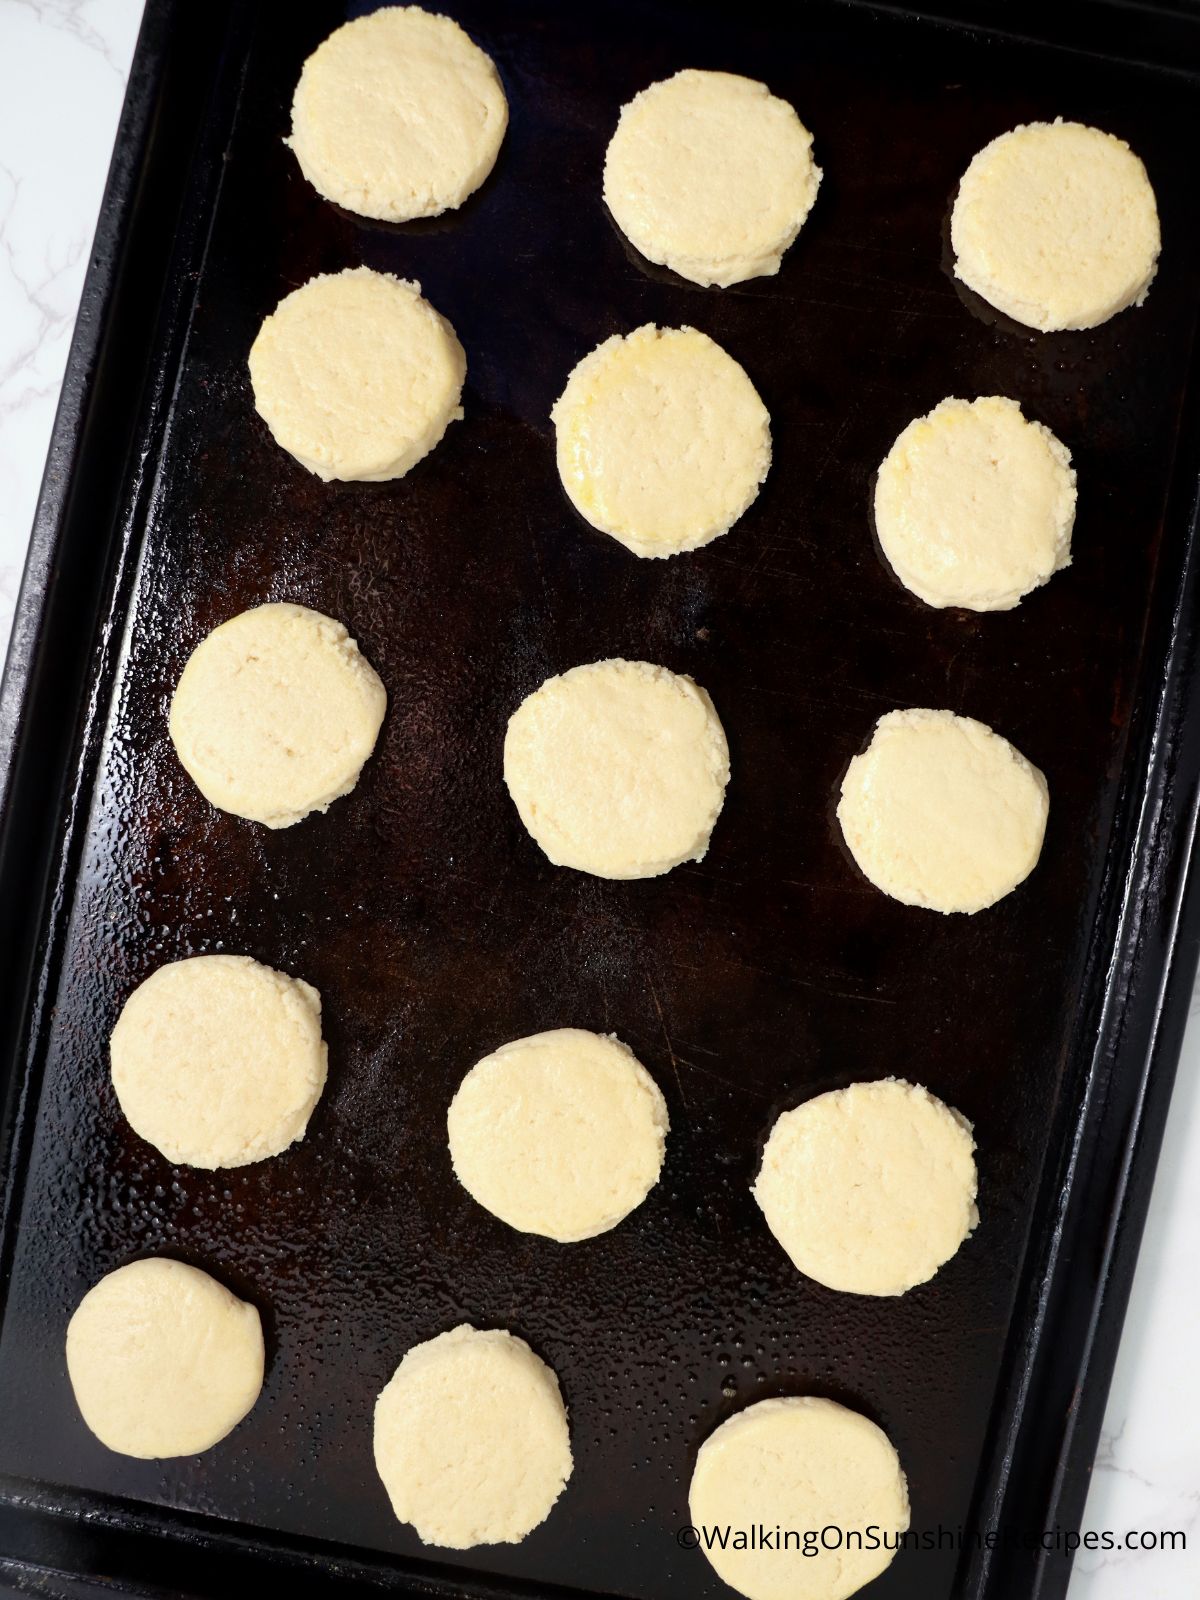 Sugar cookies baked on tray.